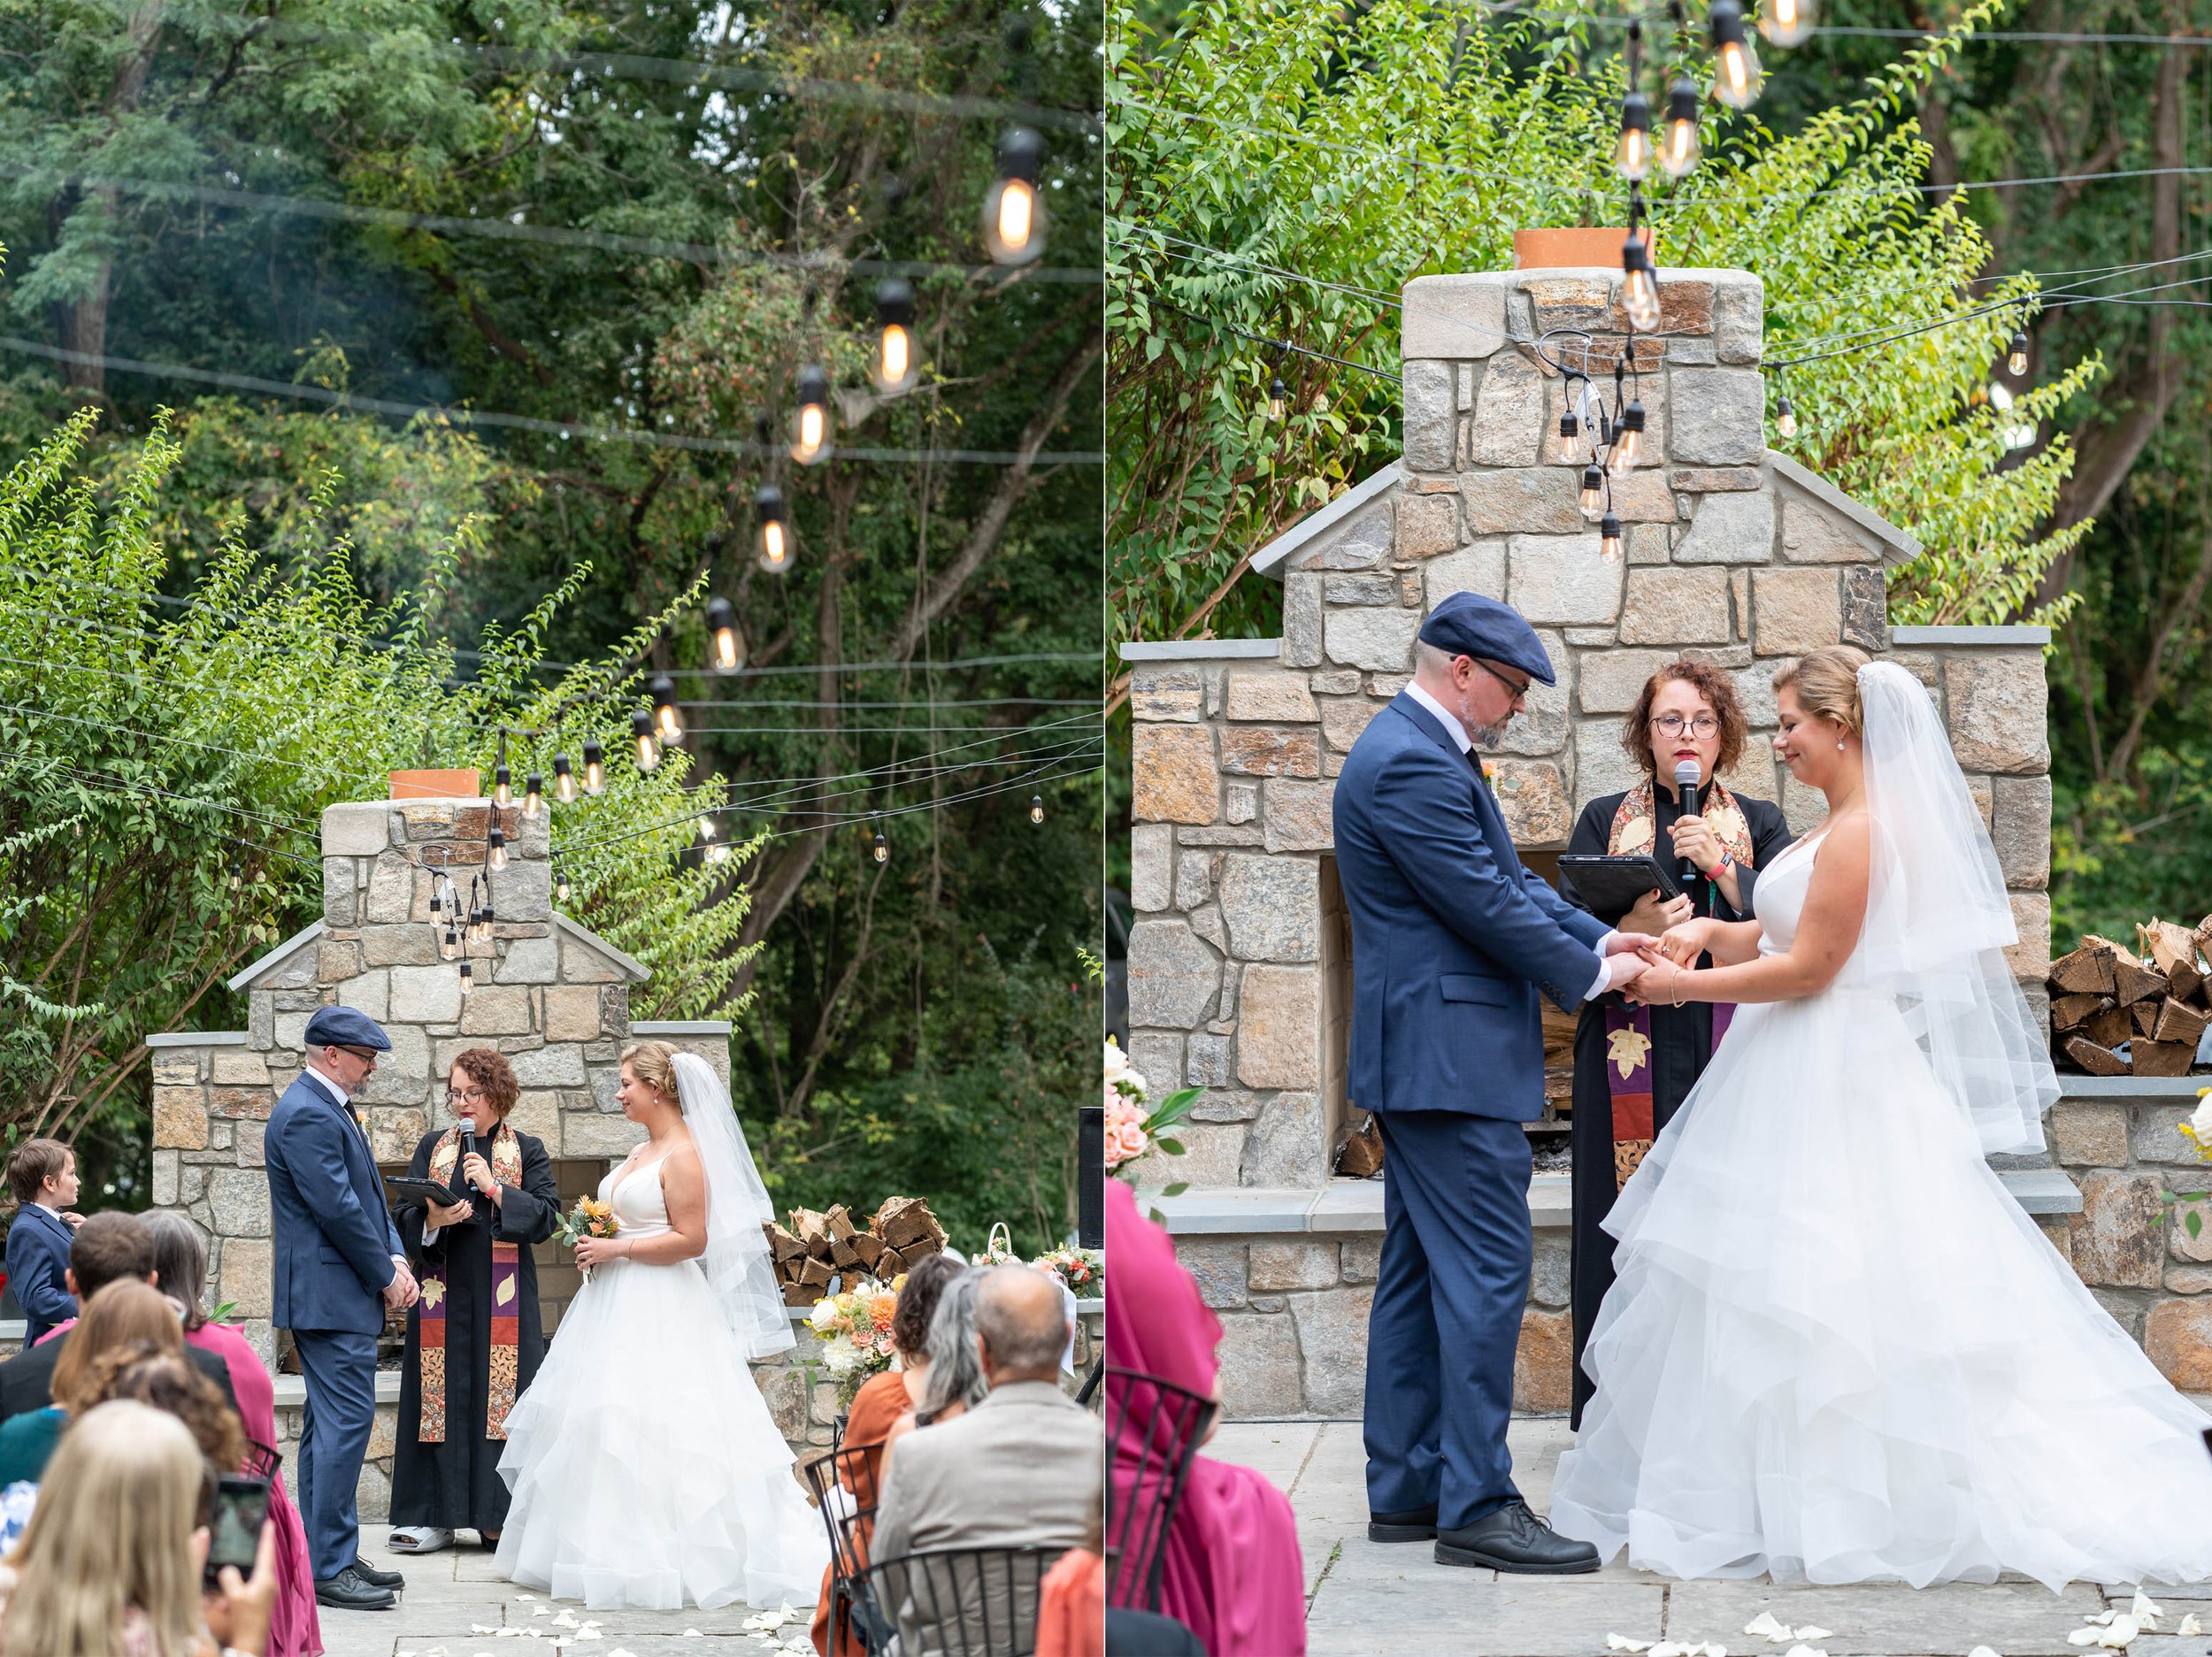 Bride and groom exchange vows on terrace at Old Angler's Inn